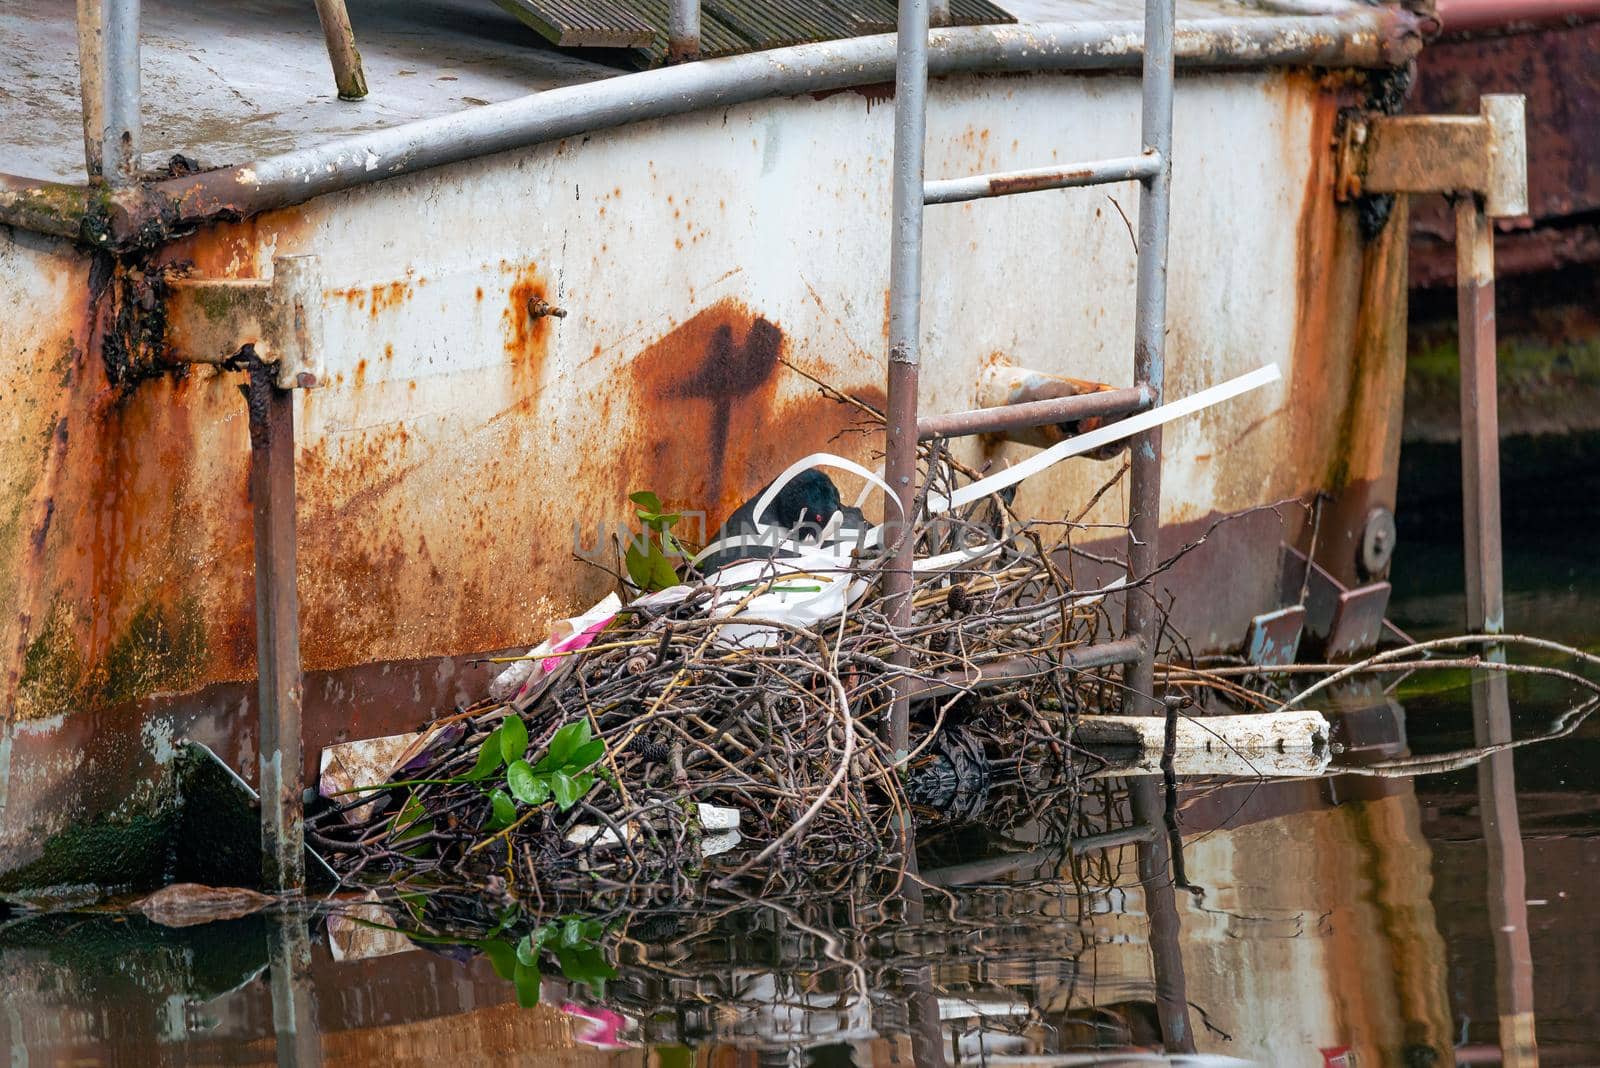 Eurasian Coot nest on the back of a rusty old boat, Amsterdam canal by Pendleton